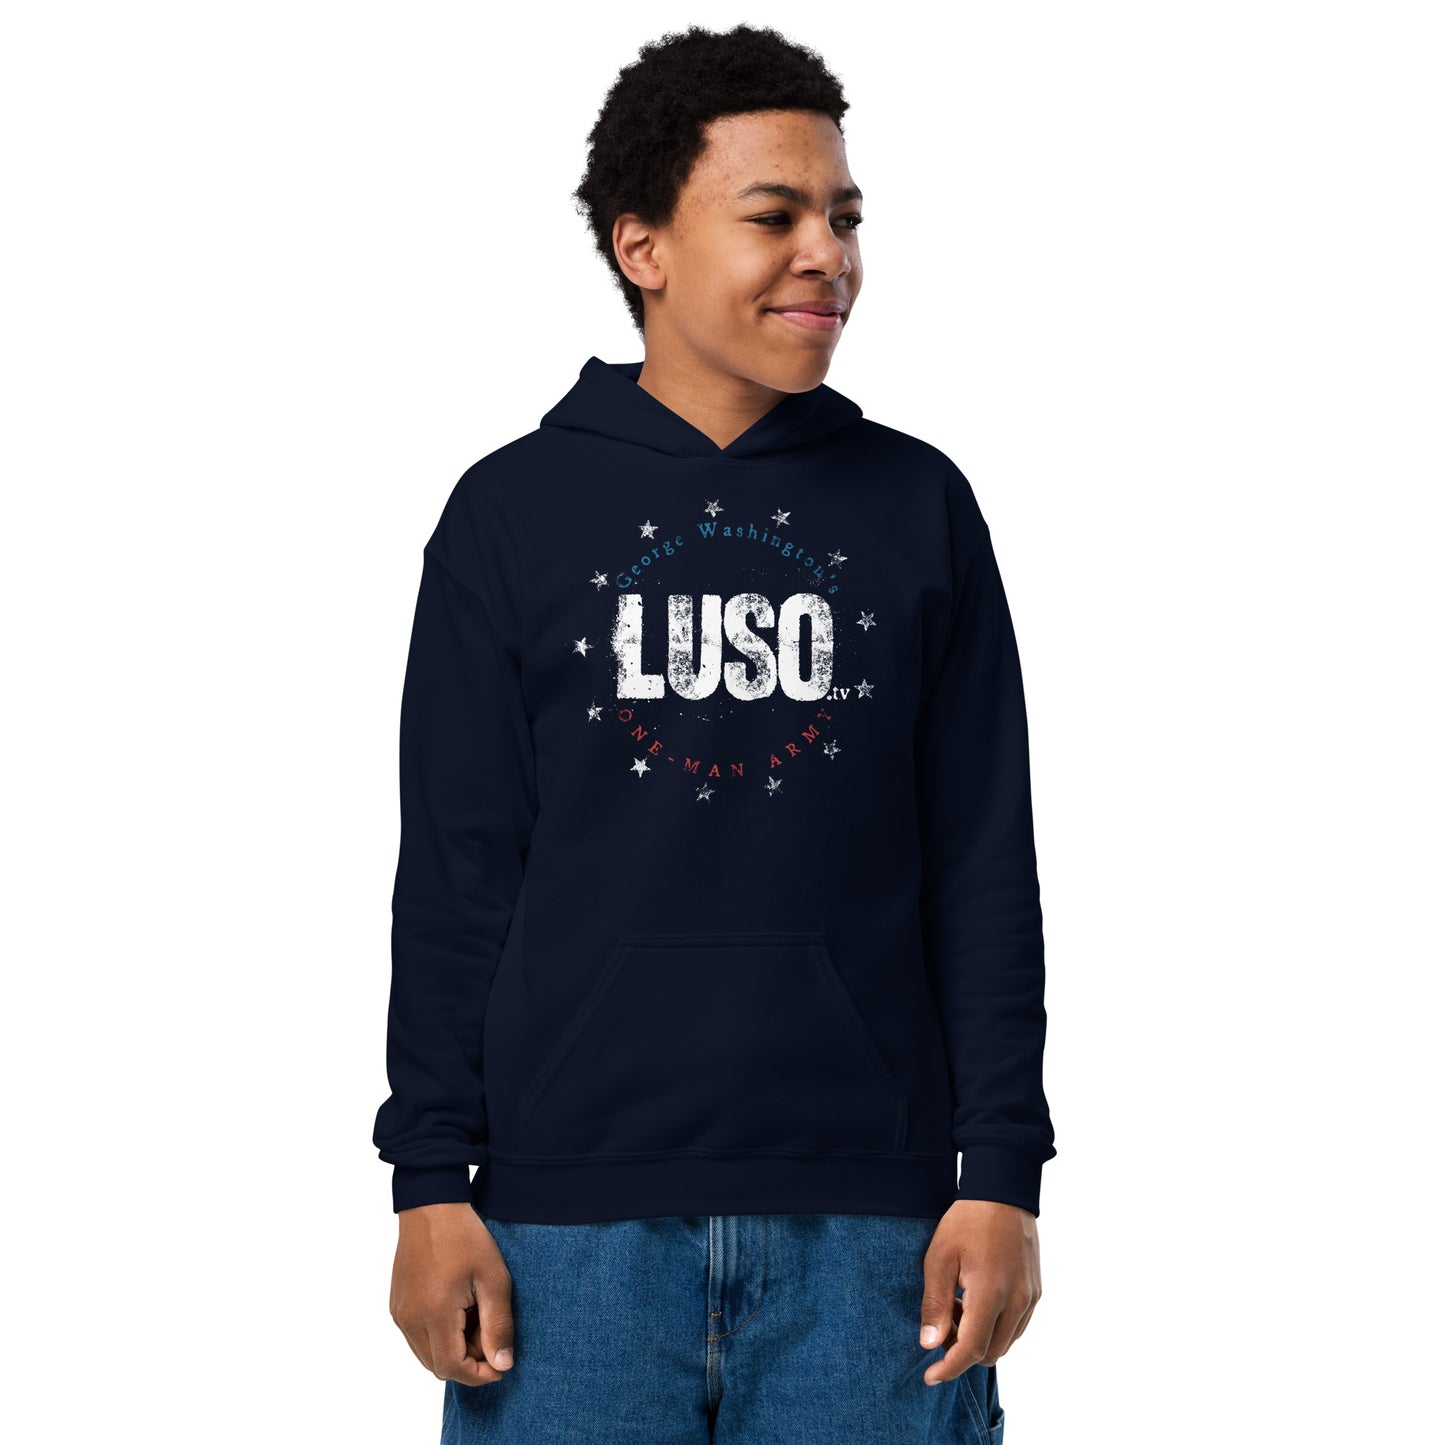 LUSO Youth heavy blend hoodie